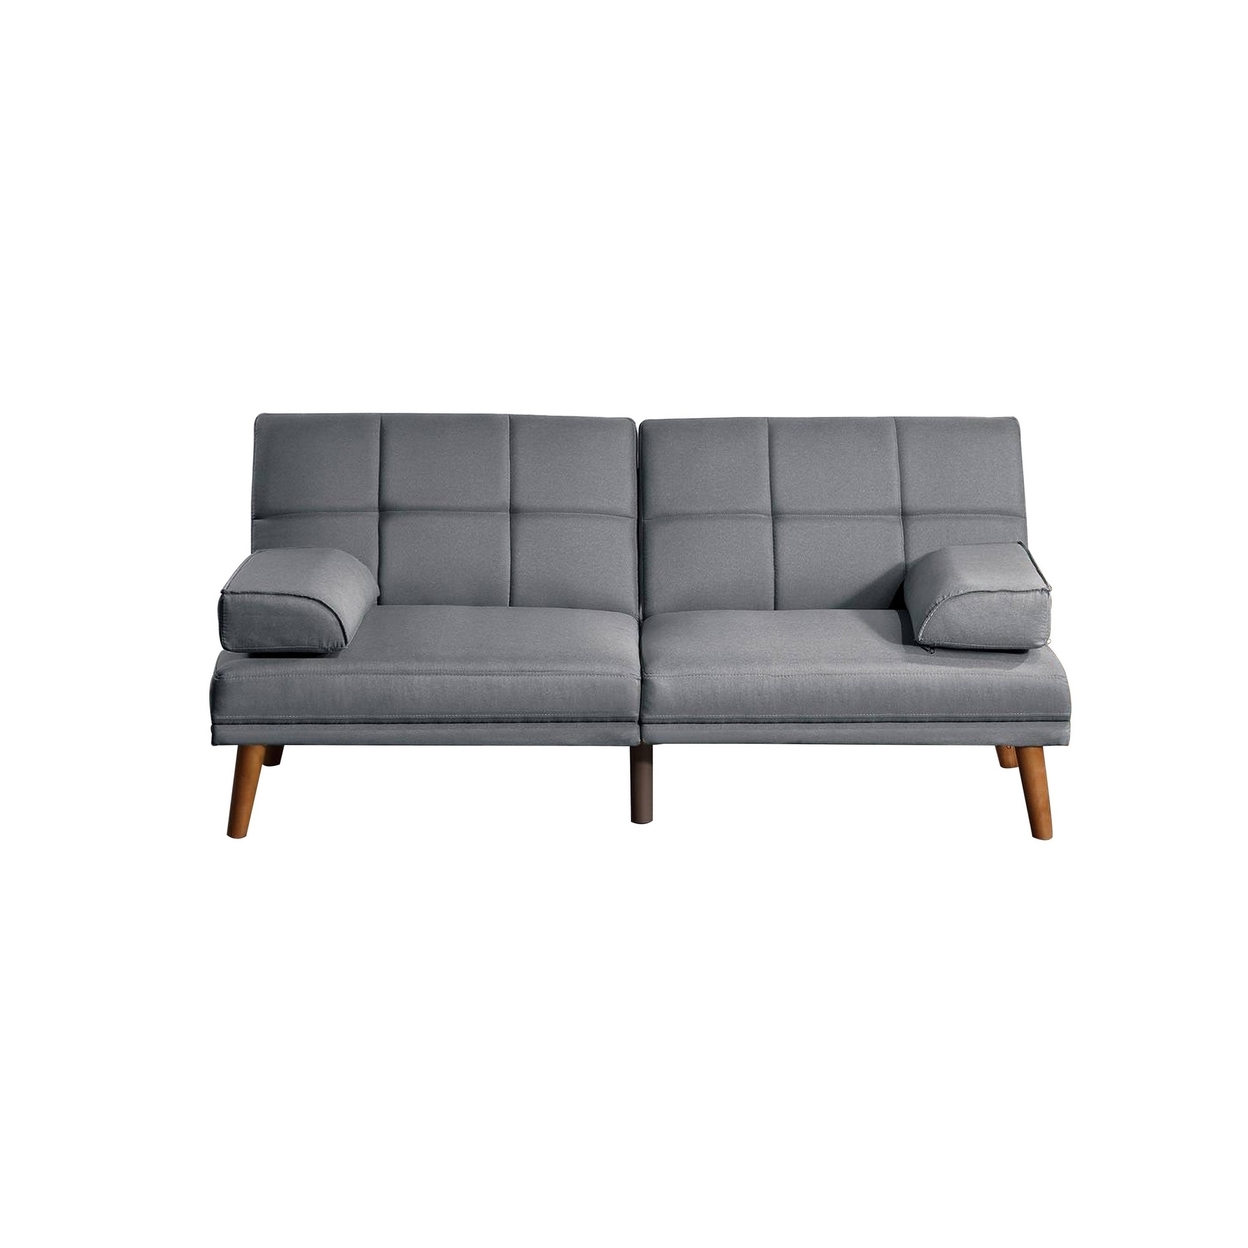 Gina 71 Inch Adjustable Futon Sofa Bed, Square Tufted, Tapered Legs, Gray